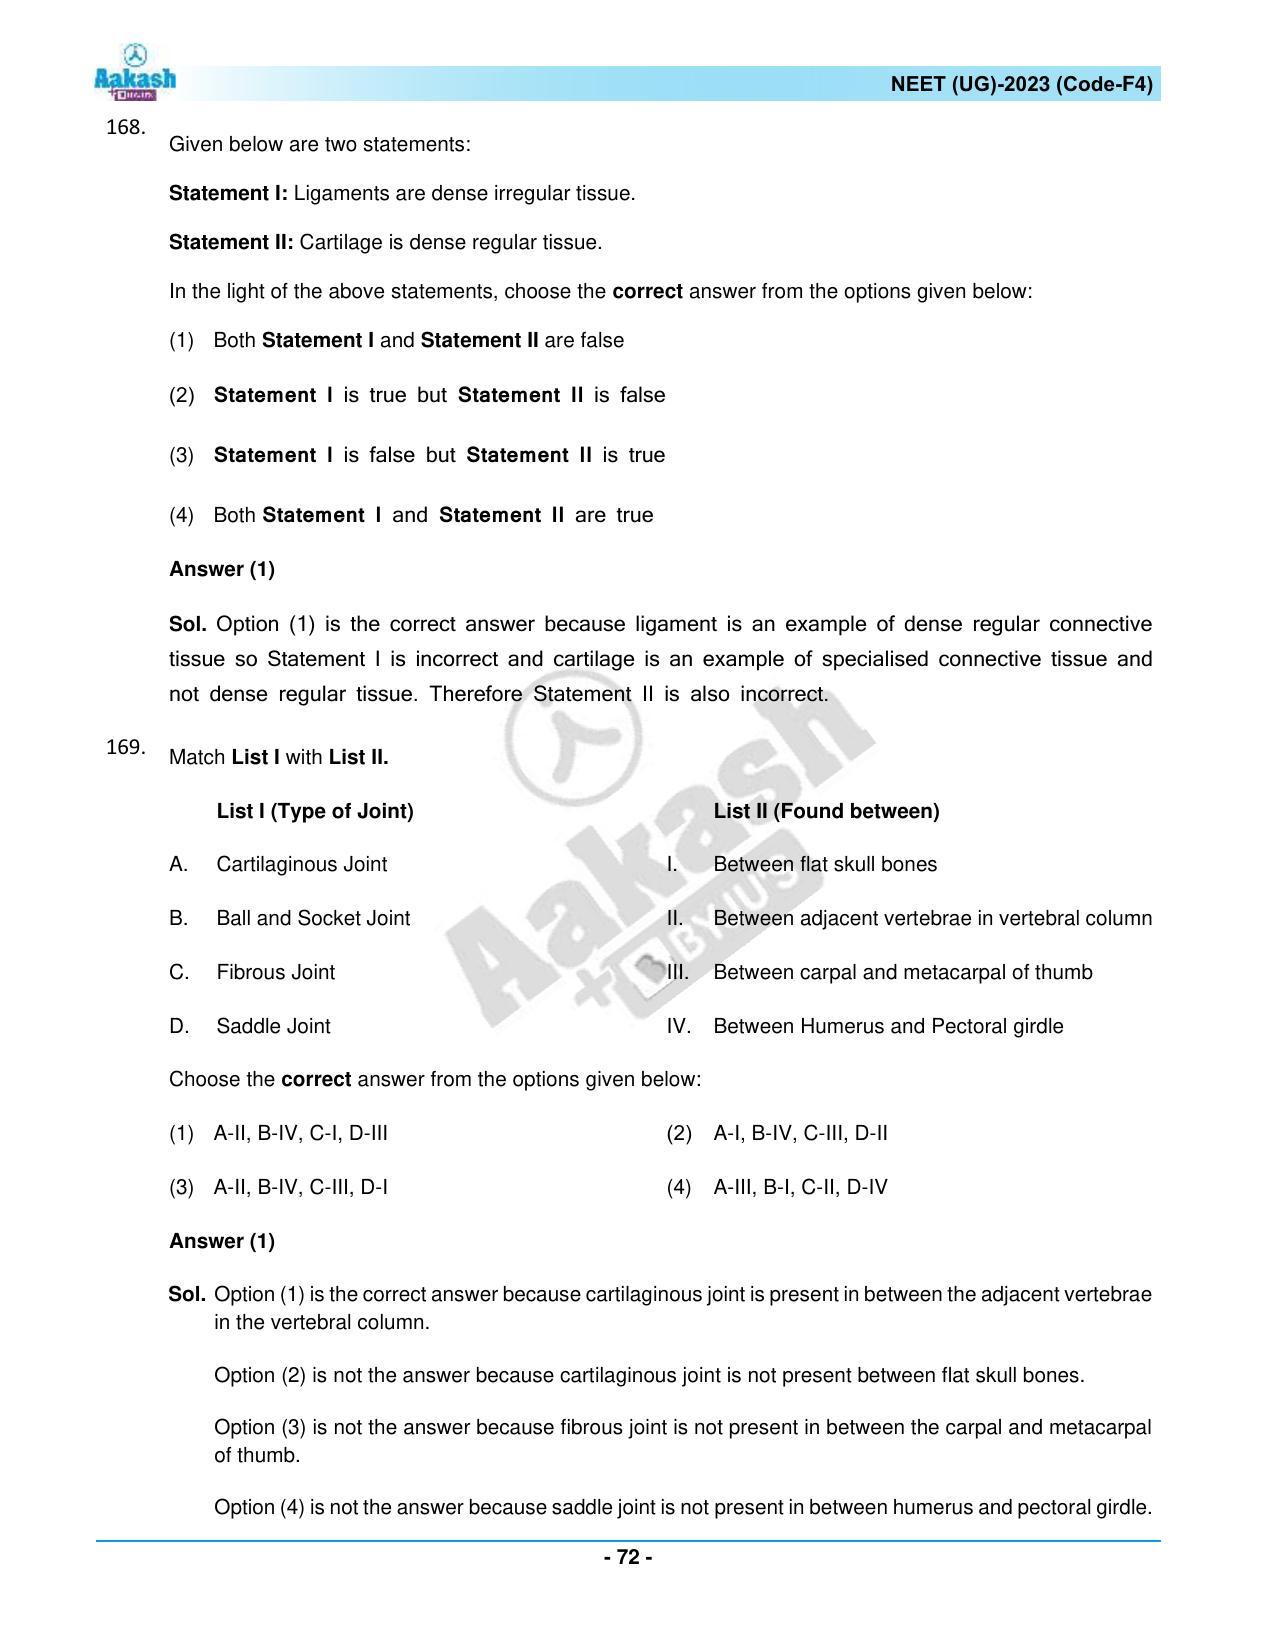 NEET 2023 Question Paper F4 - Page 72